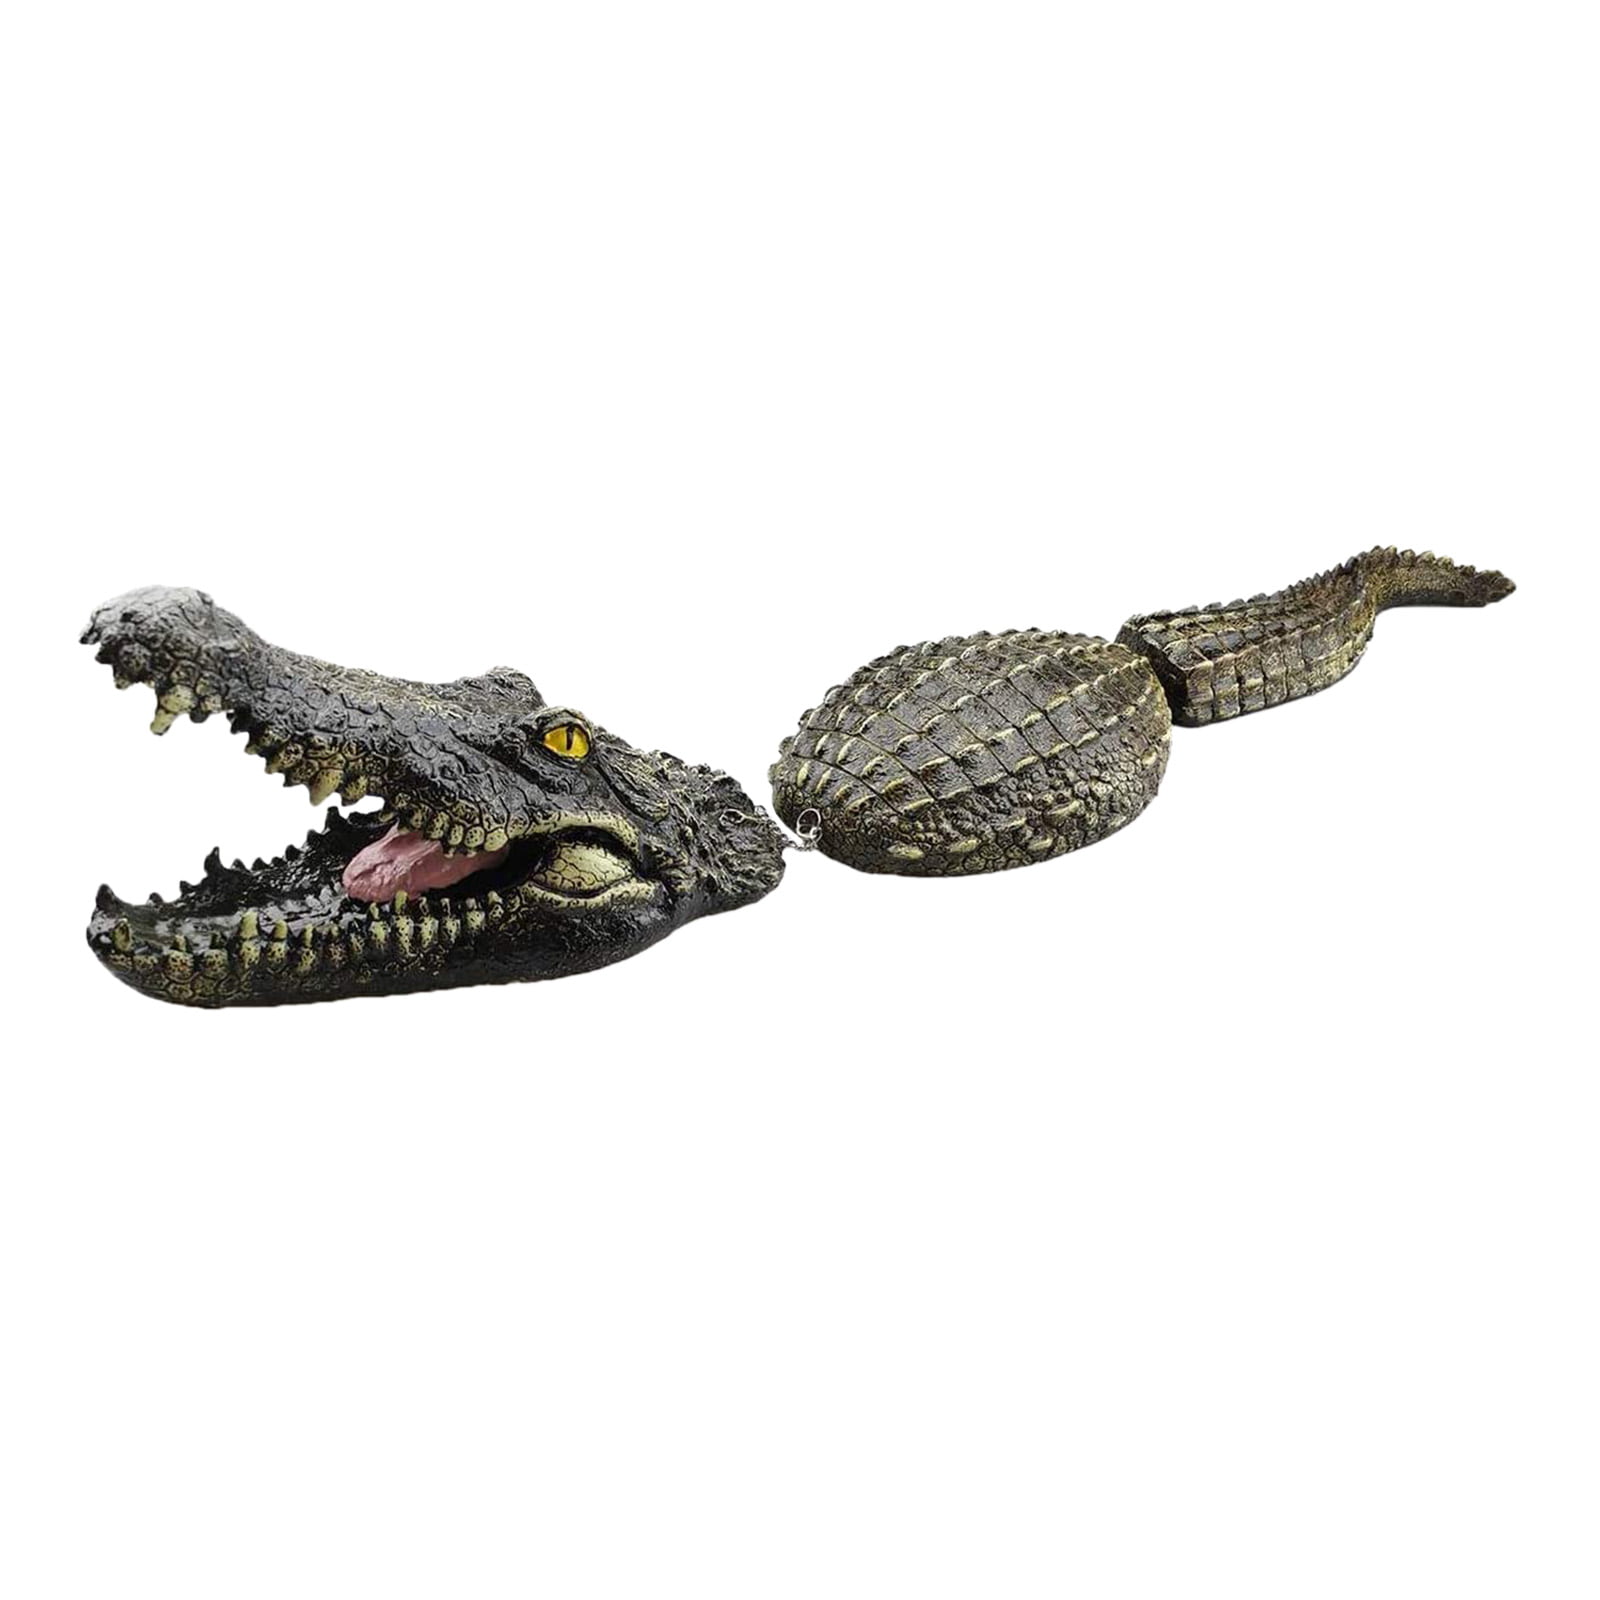 ALLIGATOR FOR YOUR DOLL HOUSE- RESIN 